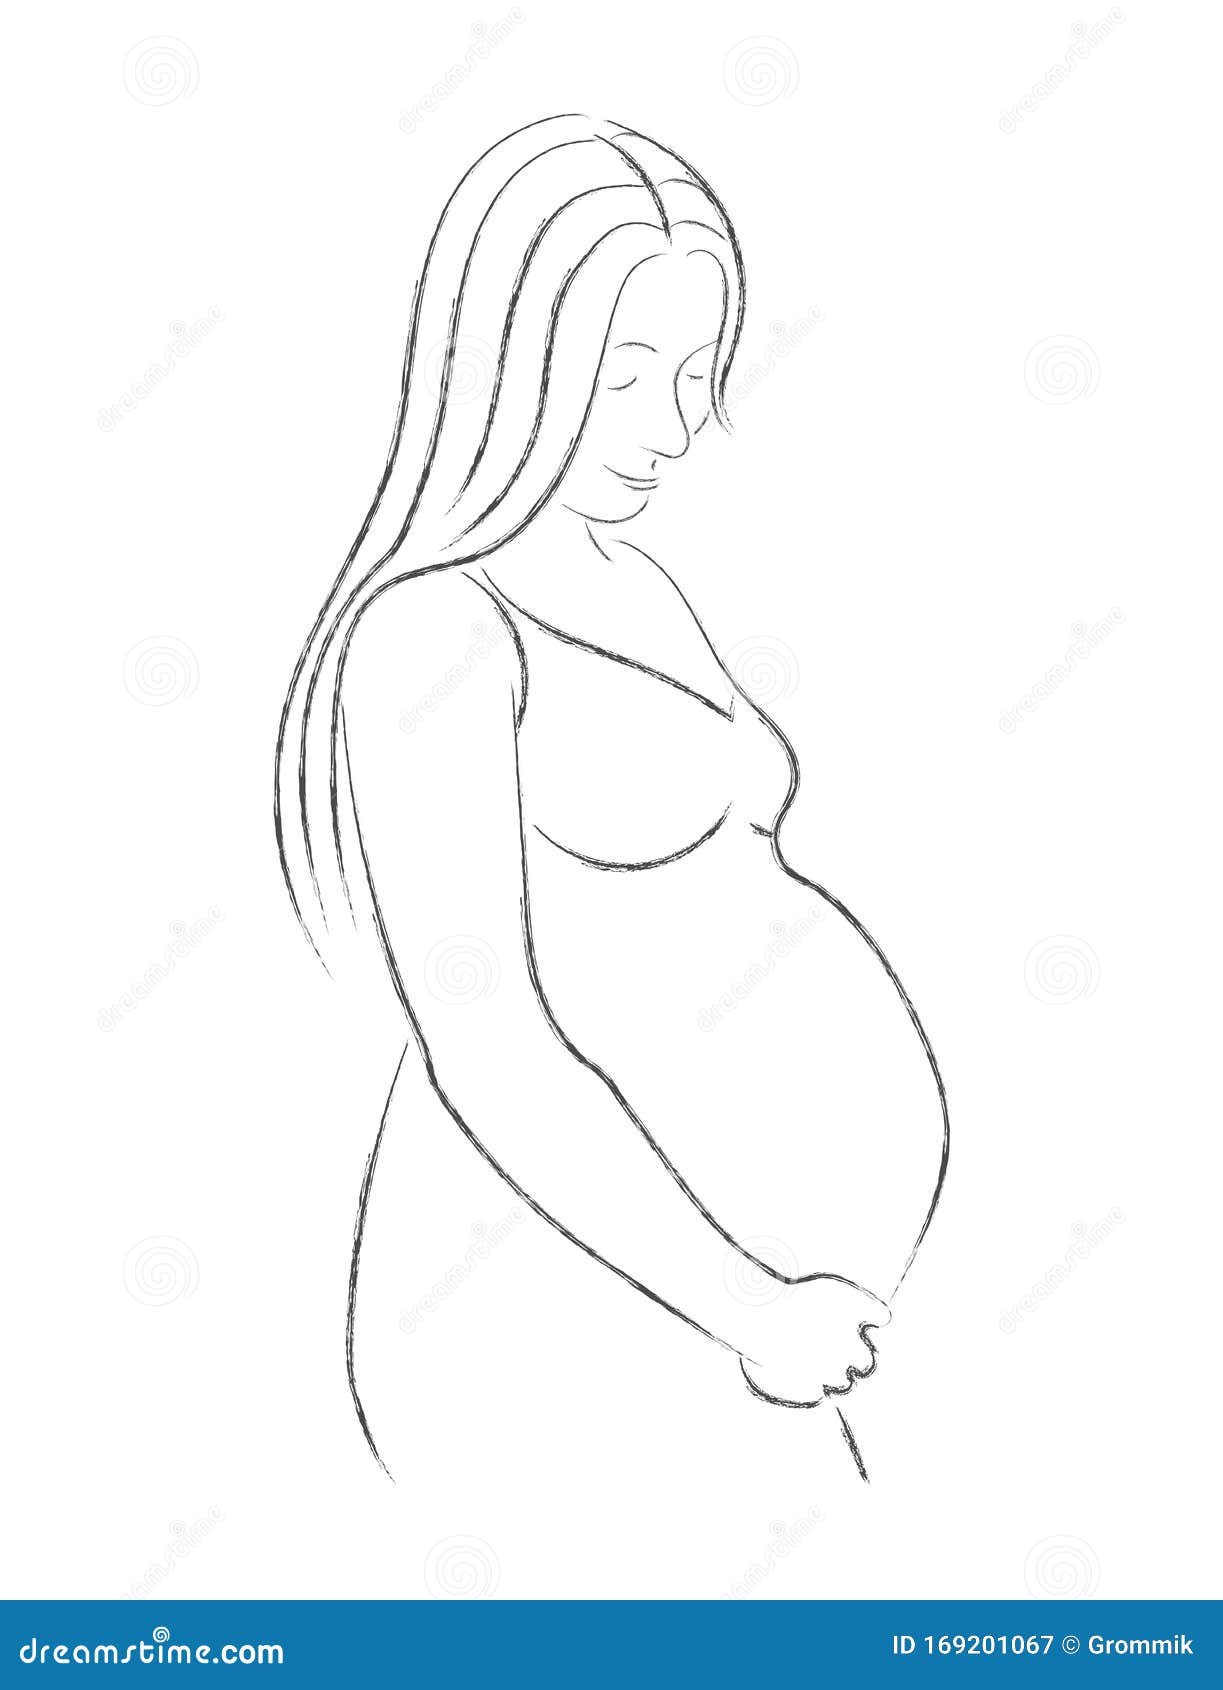 Vector Pencil Drawing Of A Pregnant Woman. Isolated On A